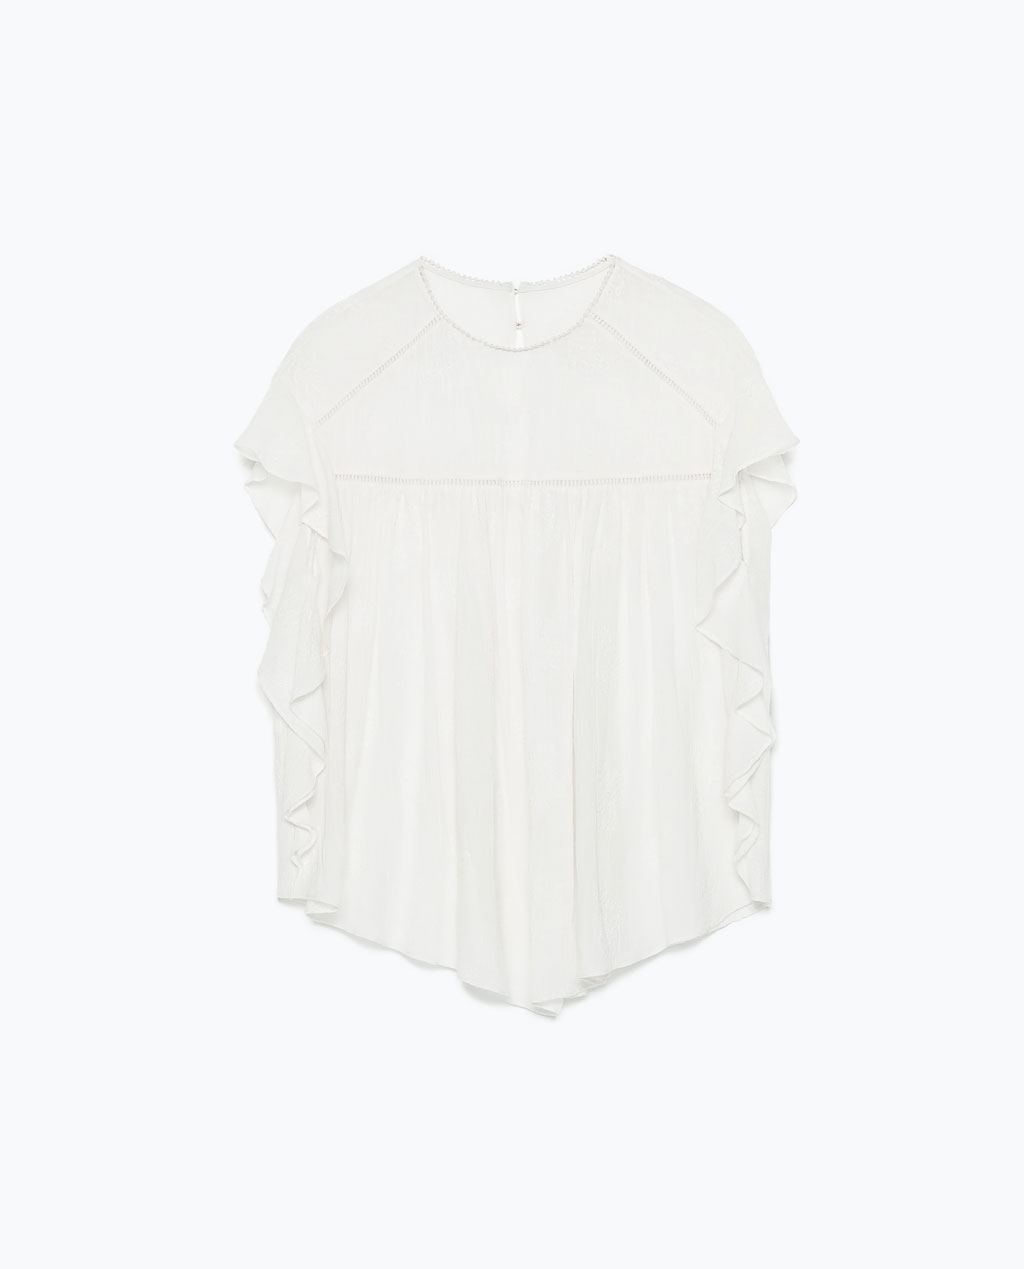 Zara Embroidered Frilly Top